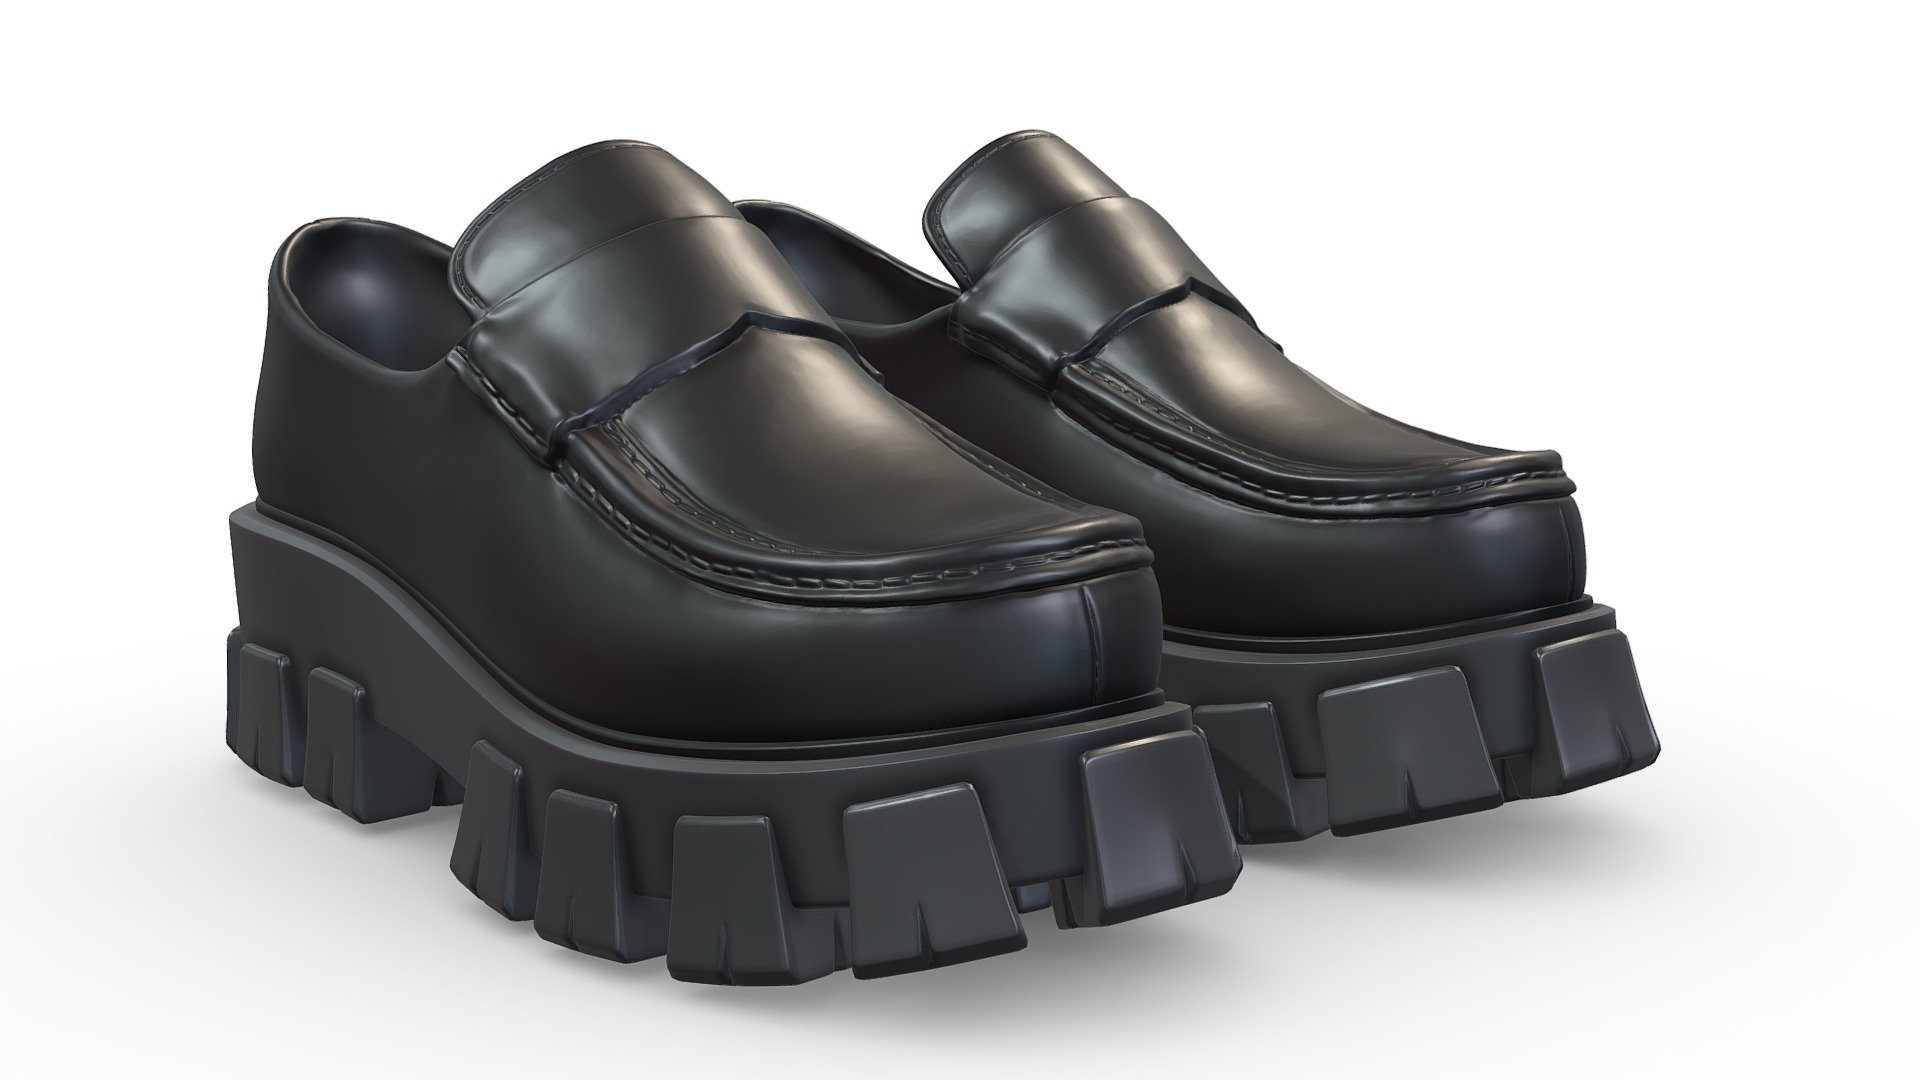 This model is ready for 3d printing,size is close to real one.

zbrush SDiv kept.This loafer shoes contains 4 to6 SDivs.

If you found any issue about it or any problem please contact me directly . 

File included : FBX .OBJ .stl.collada(dae).ztl(2021.6.6) 

FBX .OBJ .stl.collada(dae) is decimated,because original mesh is too large to upload.

Thank you,have a nice day 3d model